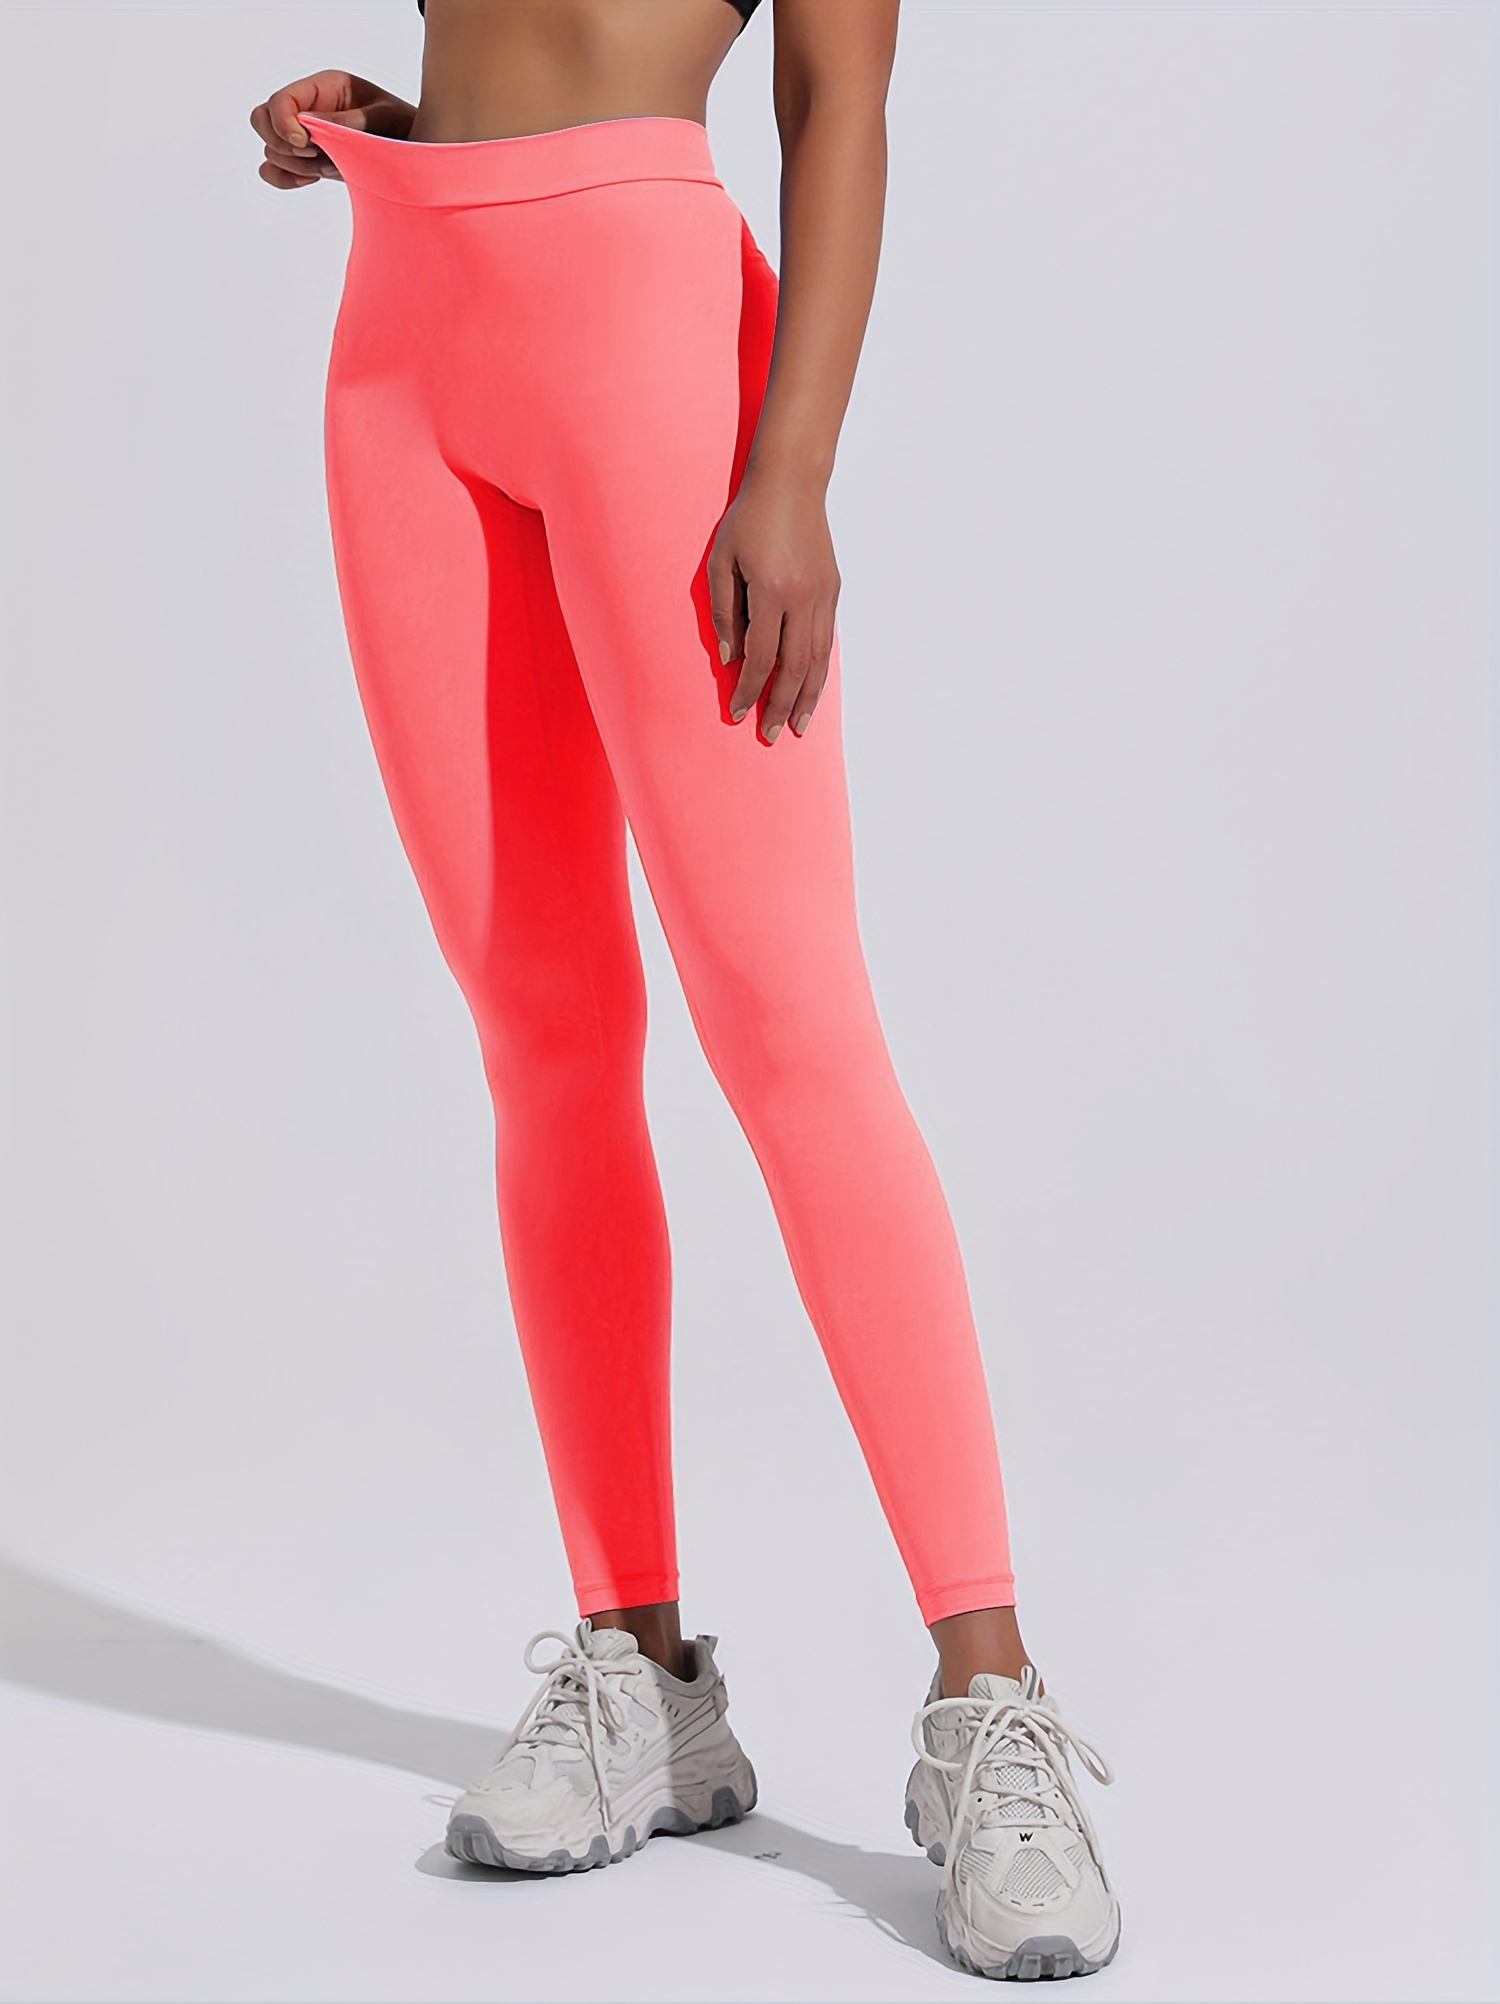 Women's Brushed Sculpt Ultra High-Rise Leggings 27.5 - All in Motion Coral  Pink 2X